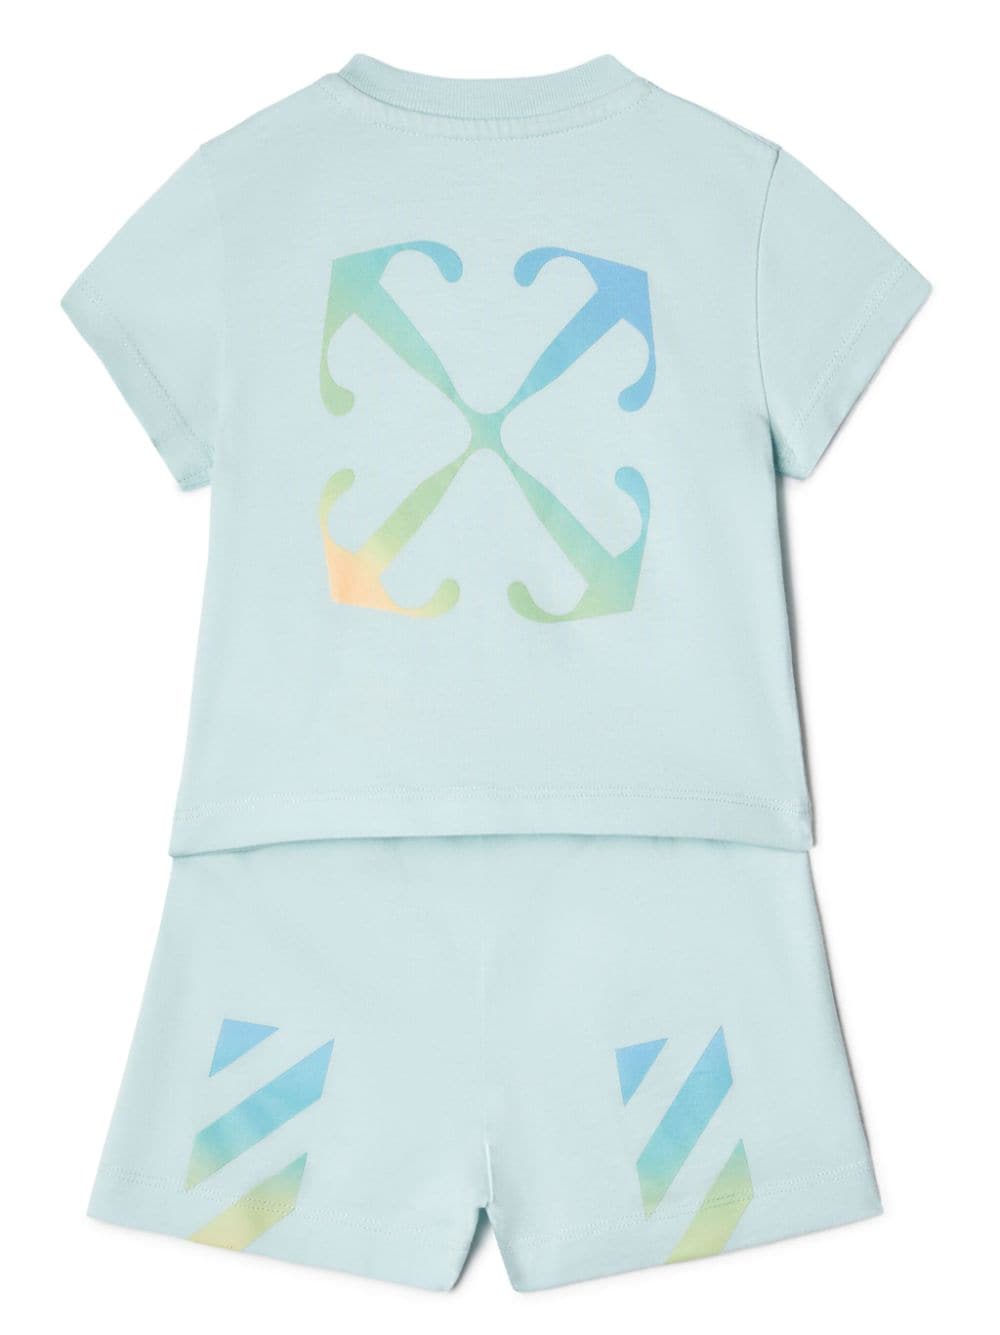 Light blue baby outfit with logo